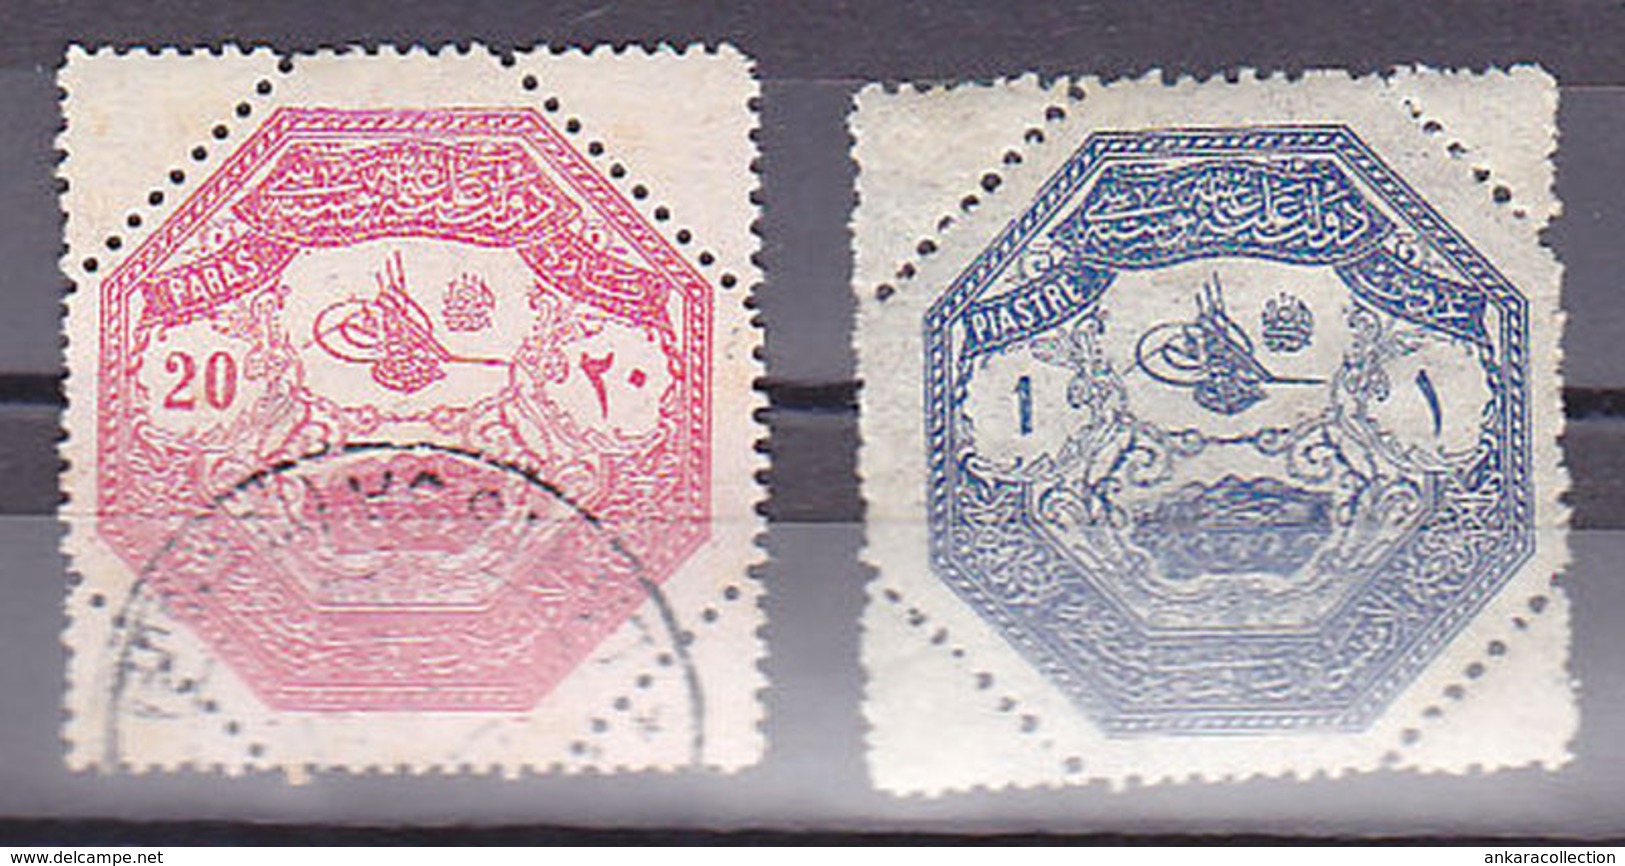 AC - TURKEY STAMPS  - POSTAGE STAMPS FOR THE ARMY IN THESSALY 1 & 20 PARA 21 APROL 1898 - Ungebraucht